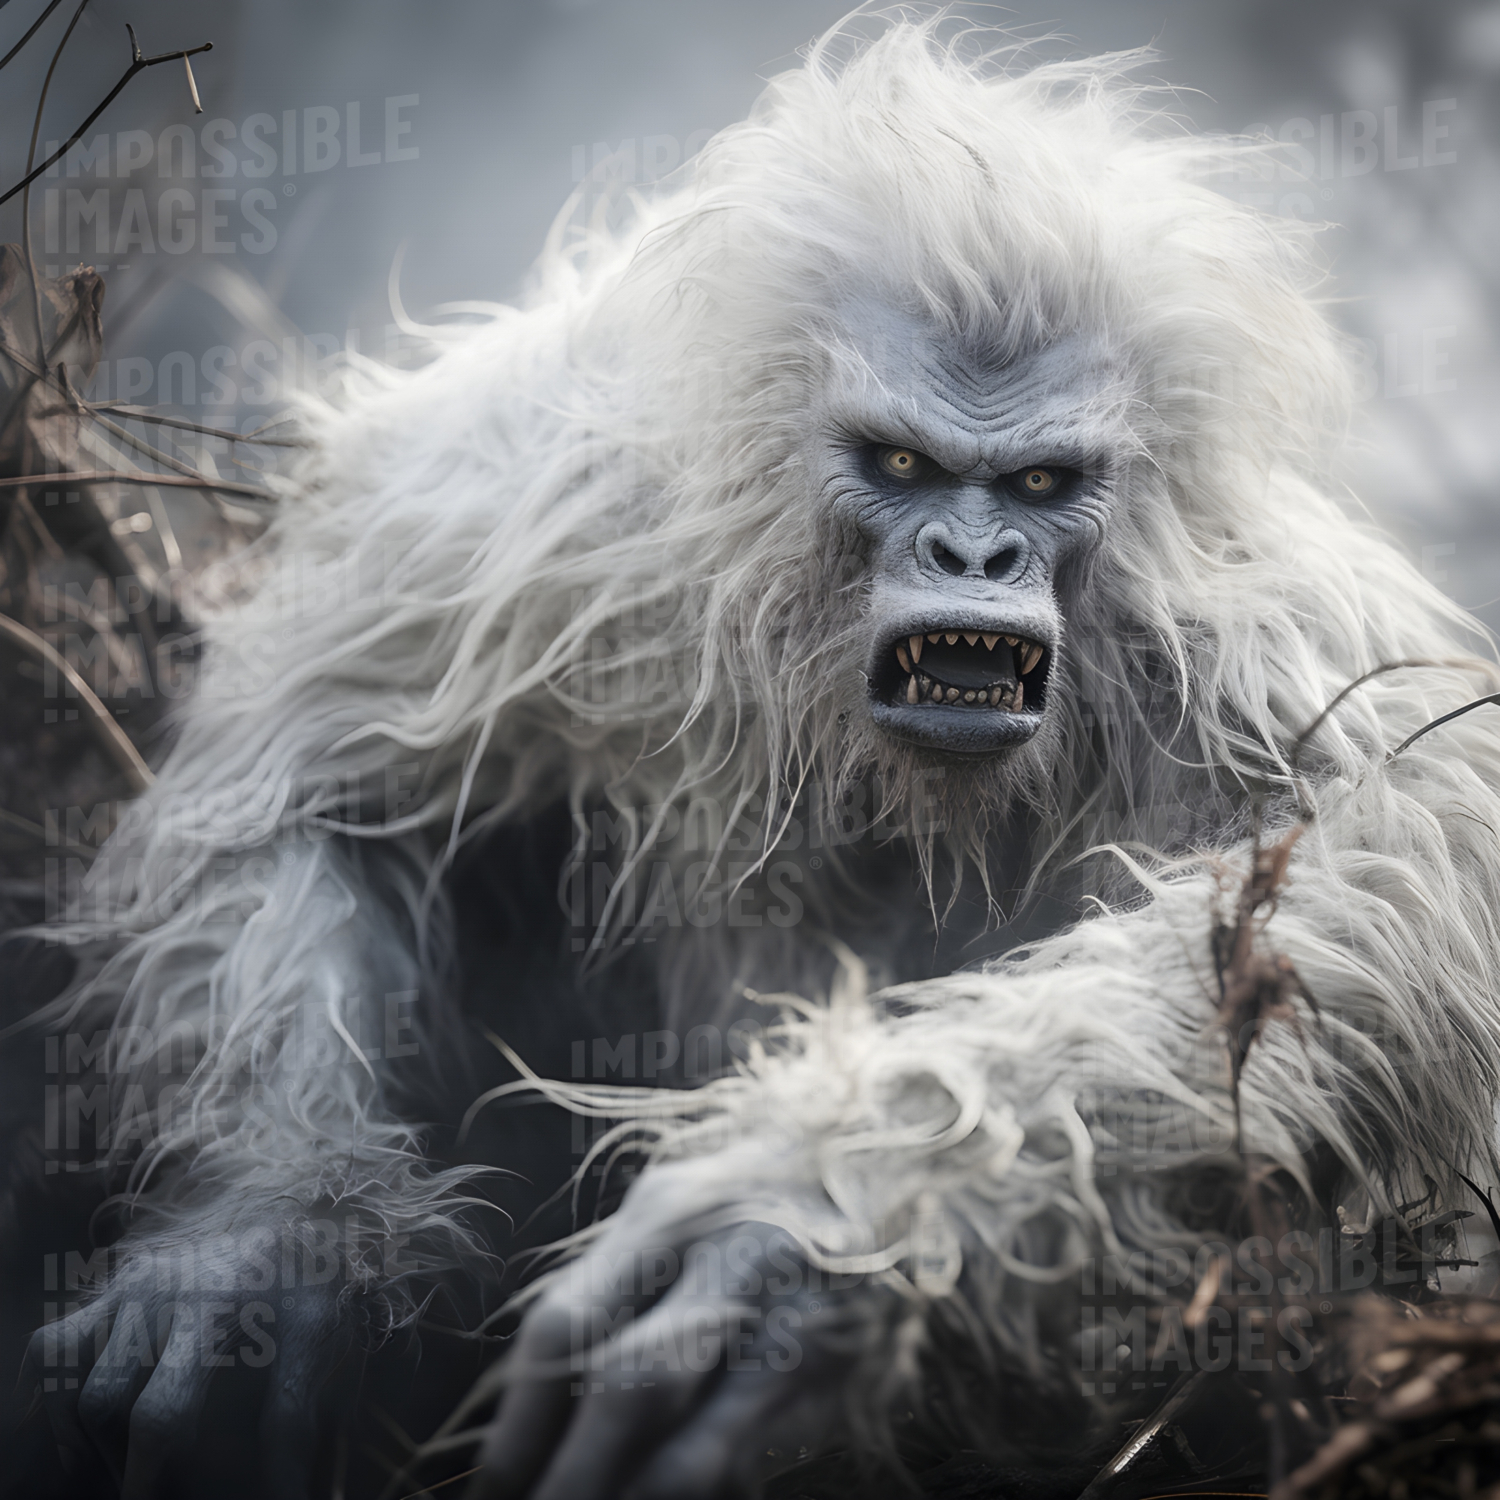 Threatening yeti approaching through the woods -  Mysterious yeti spotted in the woods, slowly advancing towards unsuspecting hikers. Fear and panic ensue as the creature's intentions remain unknown.